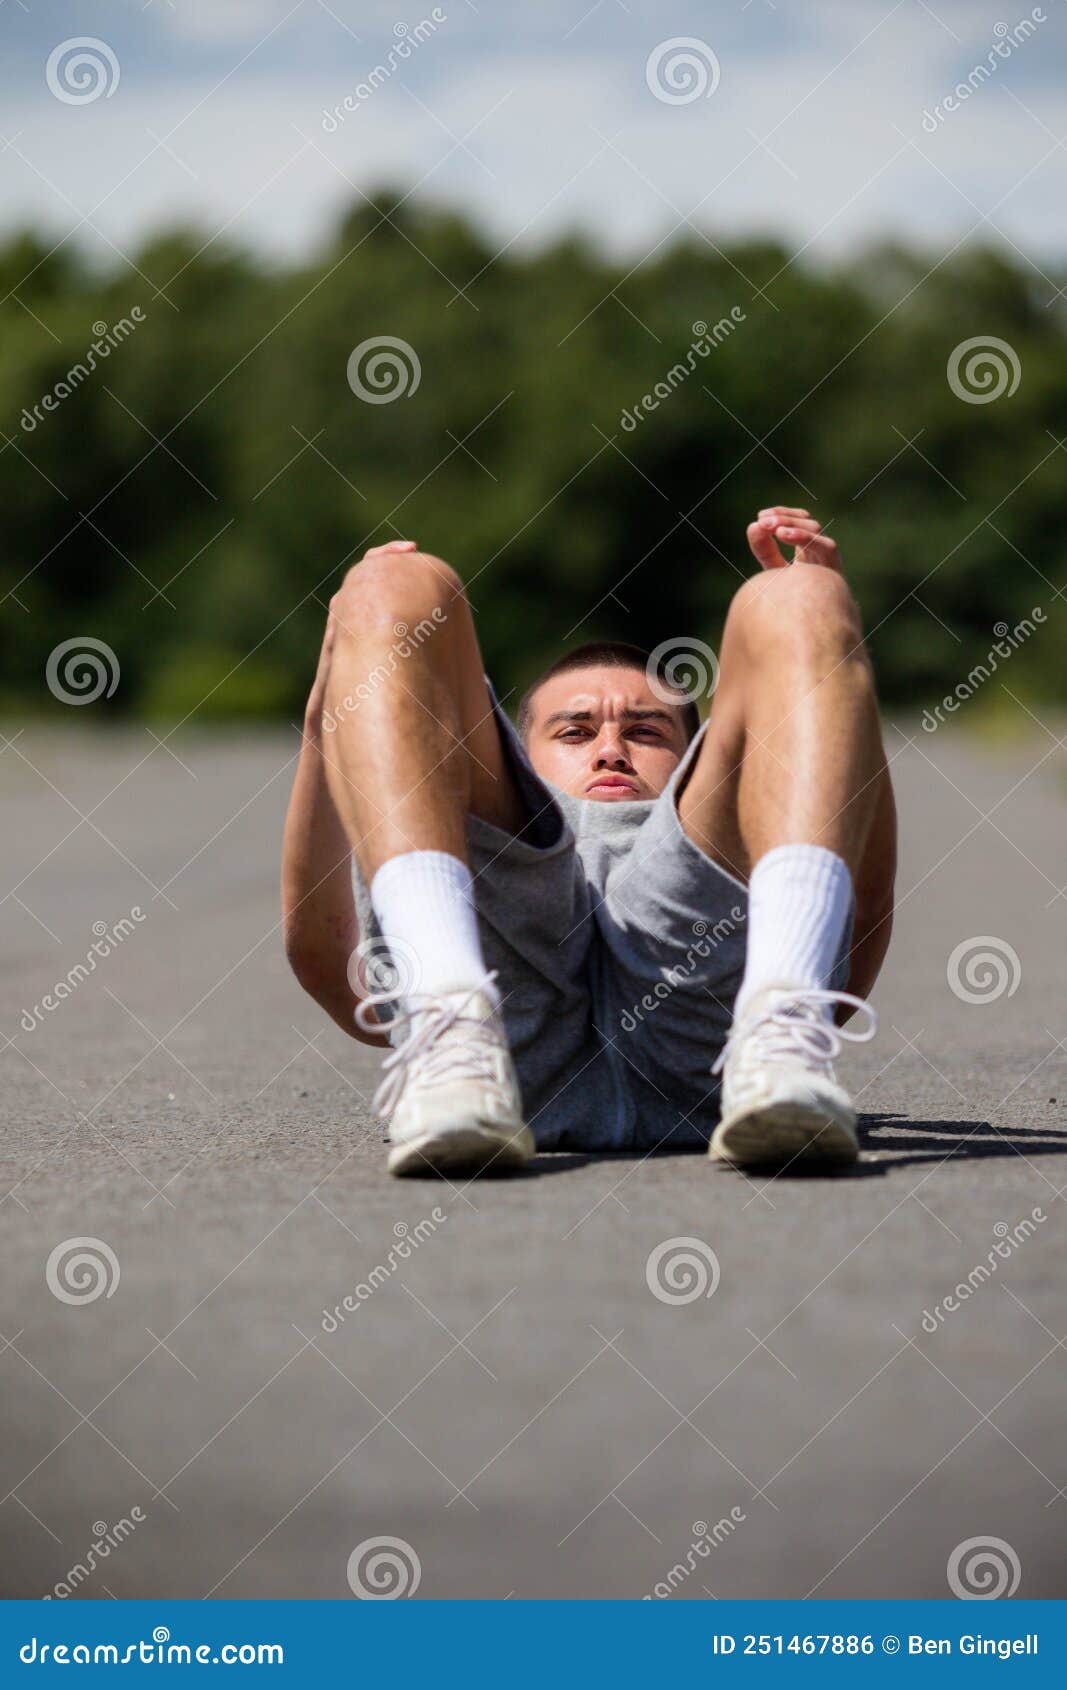 A 19 Year Old Teenage Boy Doing Situps in a Public Park Stock Photo ...